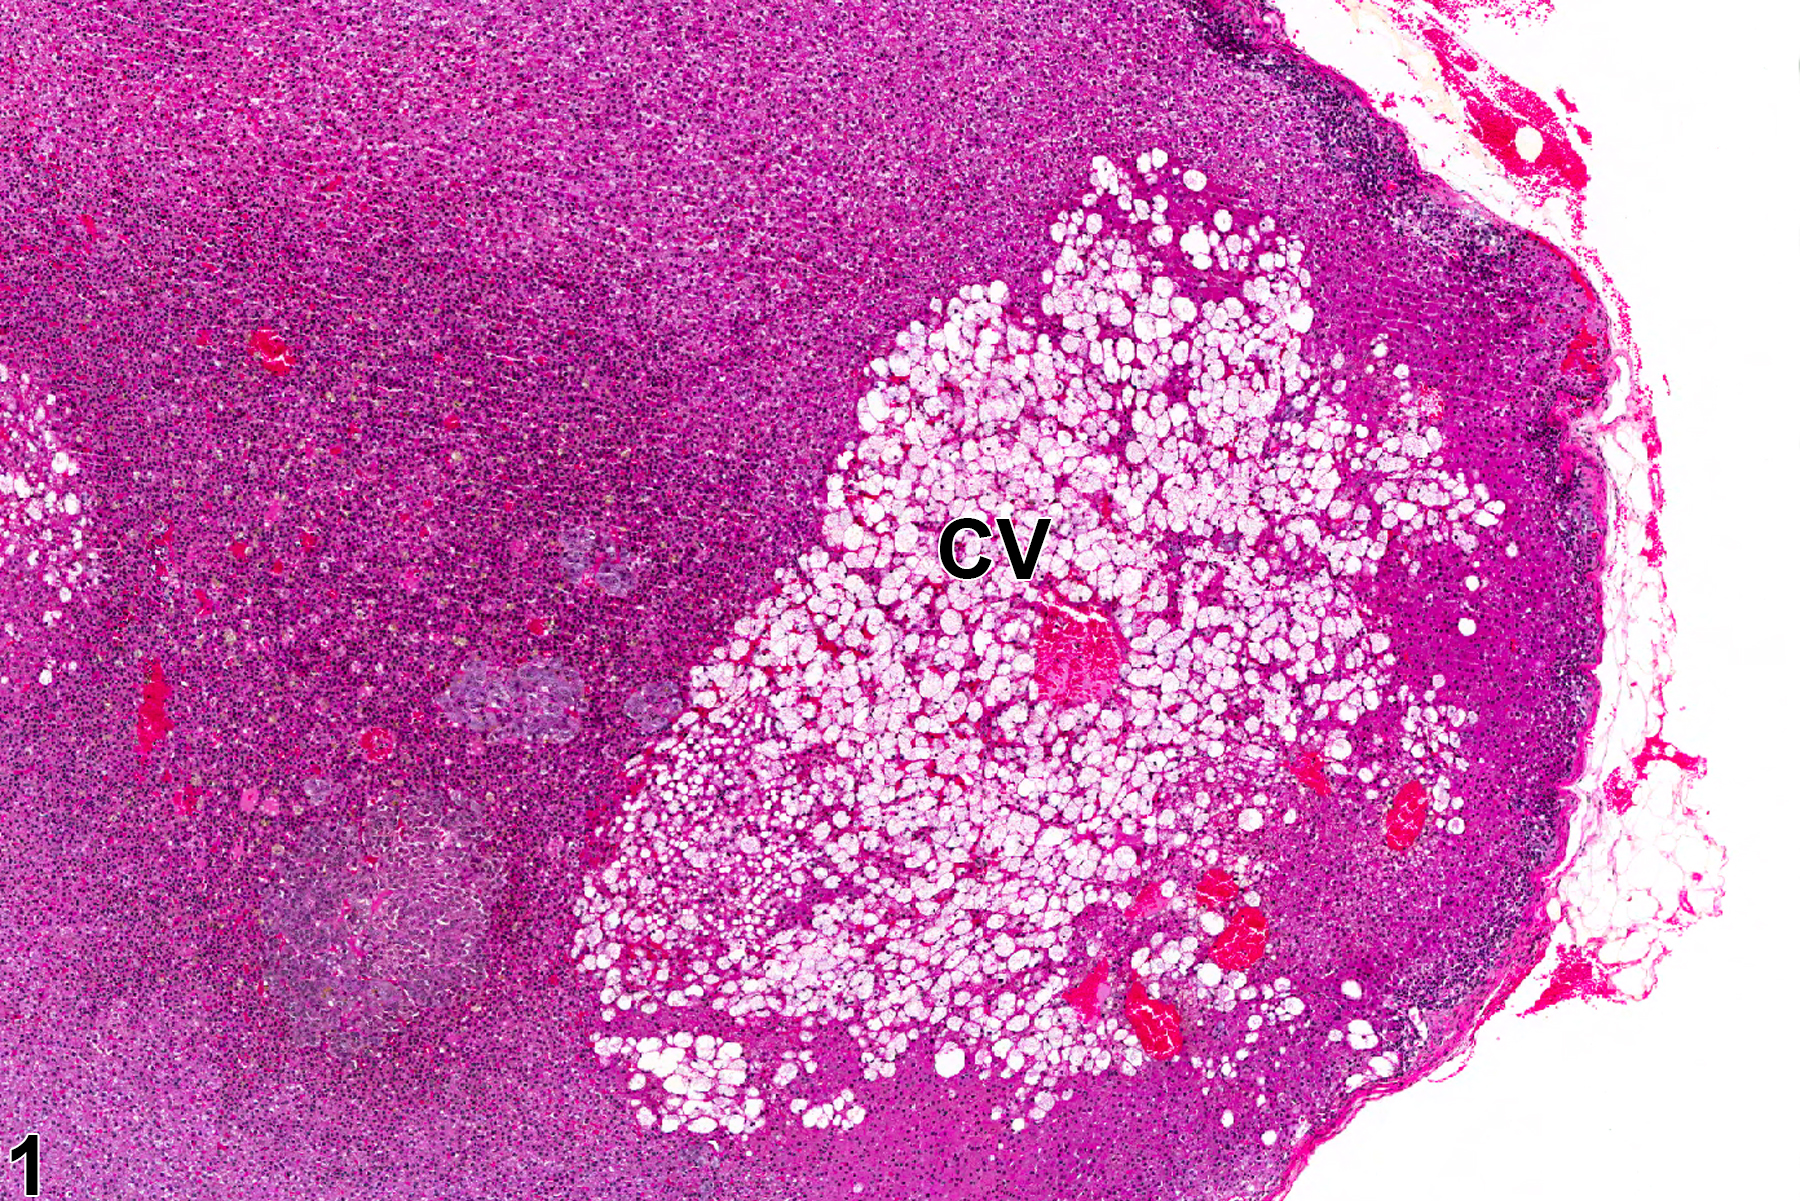 Image of vacuolization, cytoplasmic in the adrenal gland cortex from a female F344/N rat in a chronic study